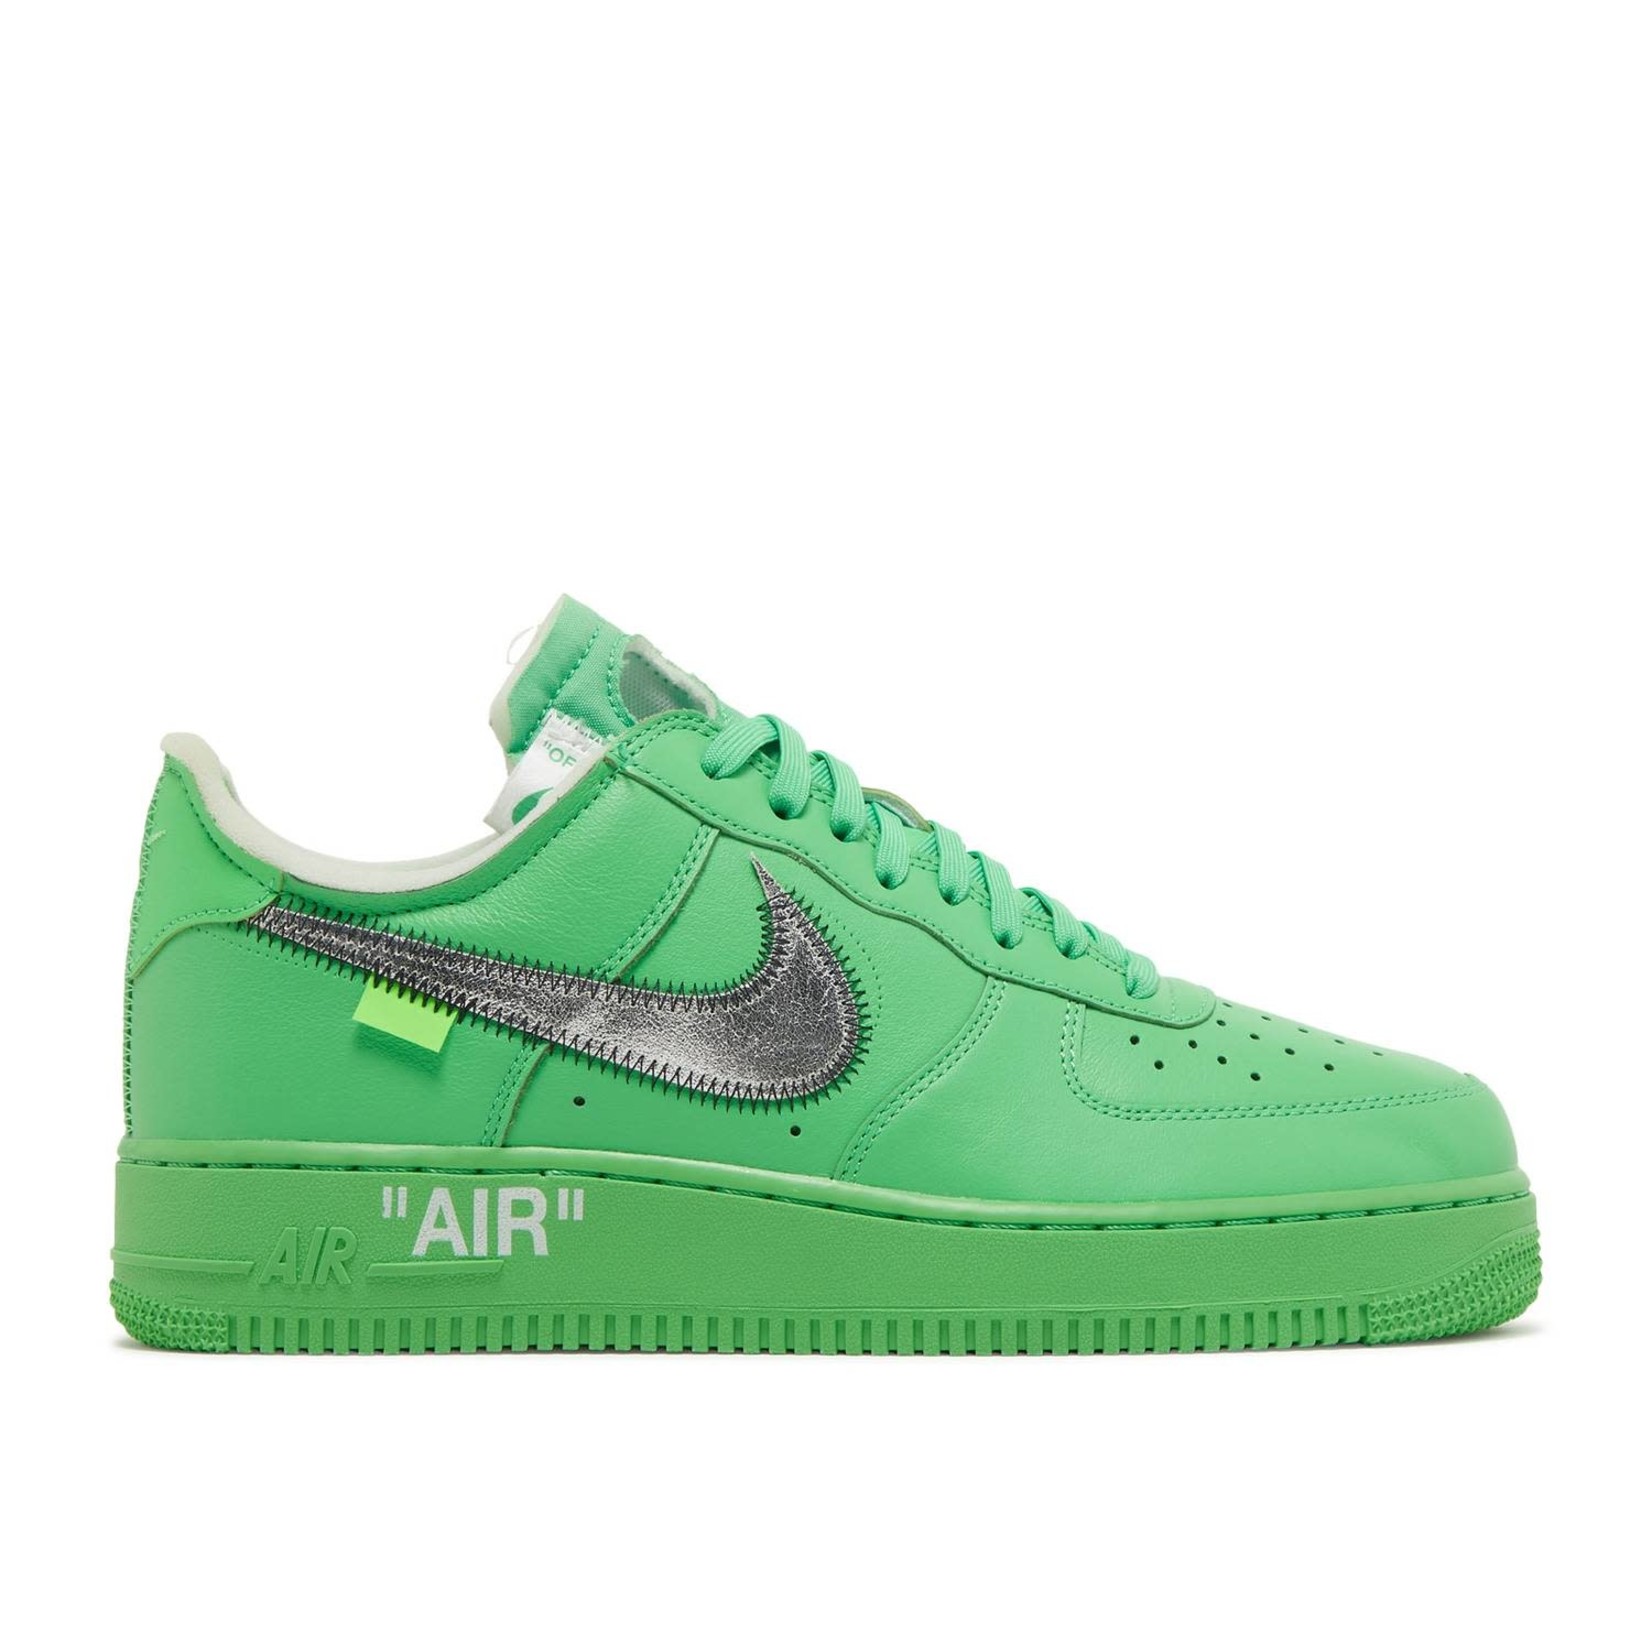 Nike Nike Air Force 1 Low Off-White Brooklyn Size 8.5, DS BRAND NEW